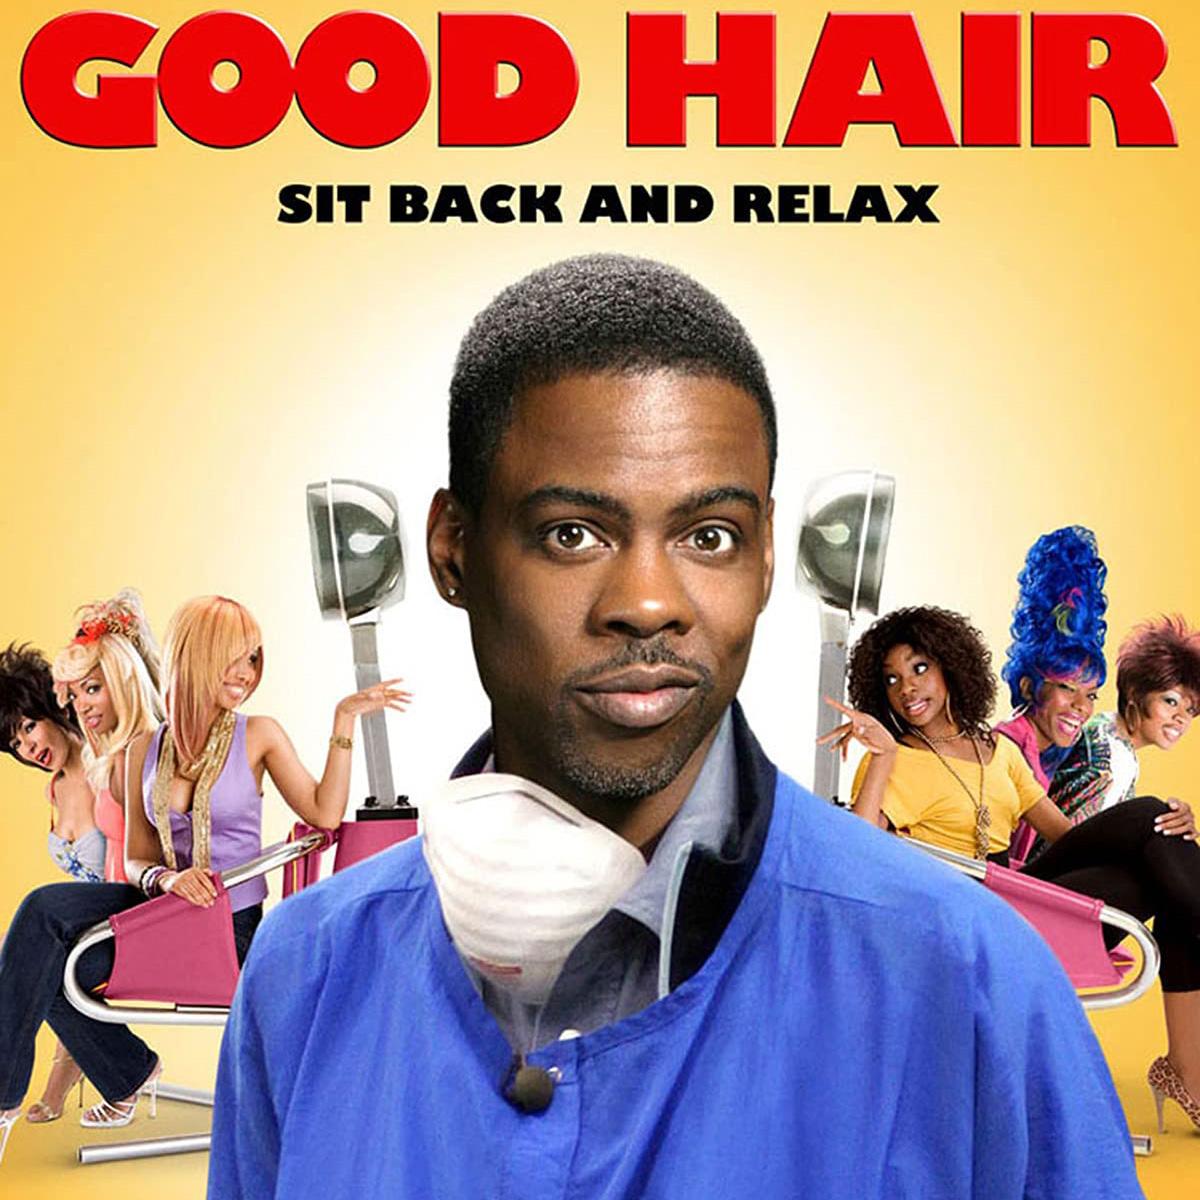 Watch Good Hair Movie with Chris Rock for Free